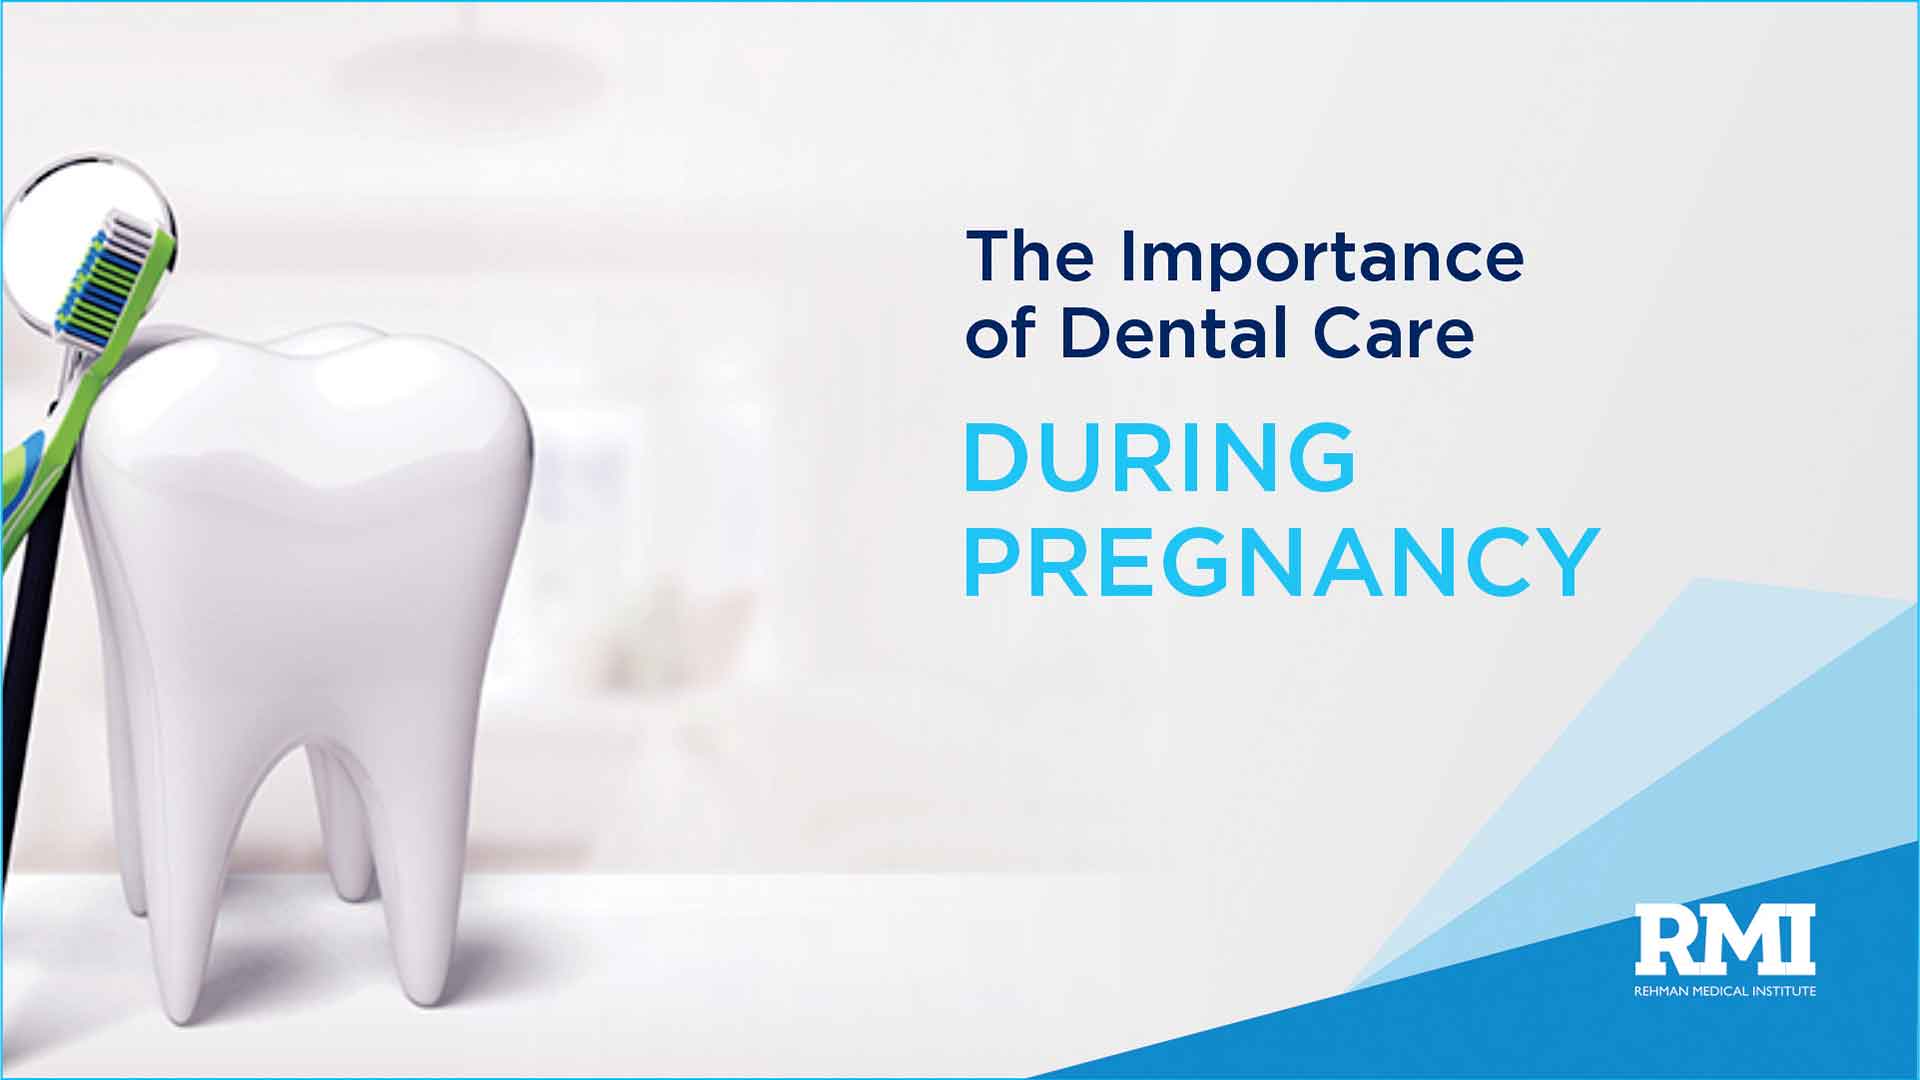 The Importance of Dental Care During Pregnancy